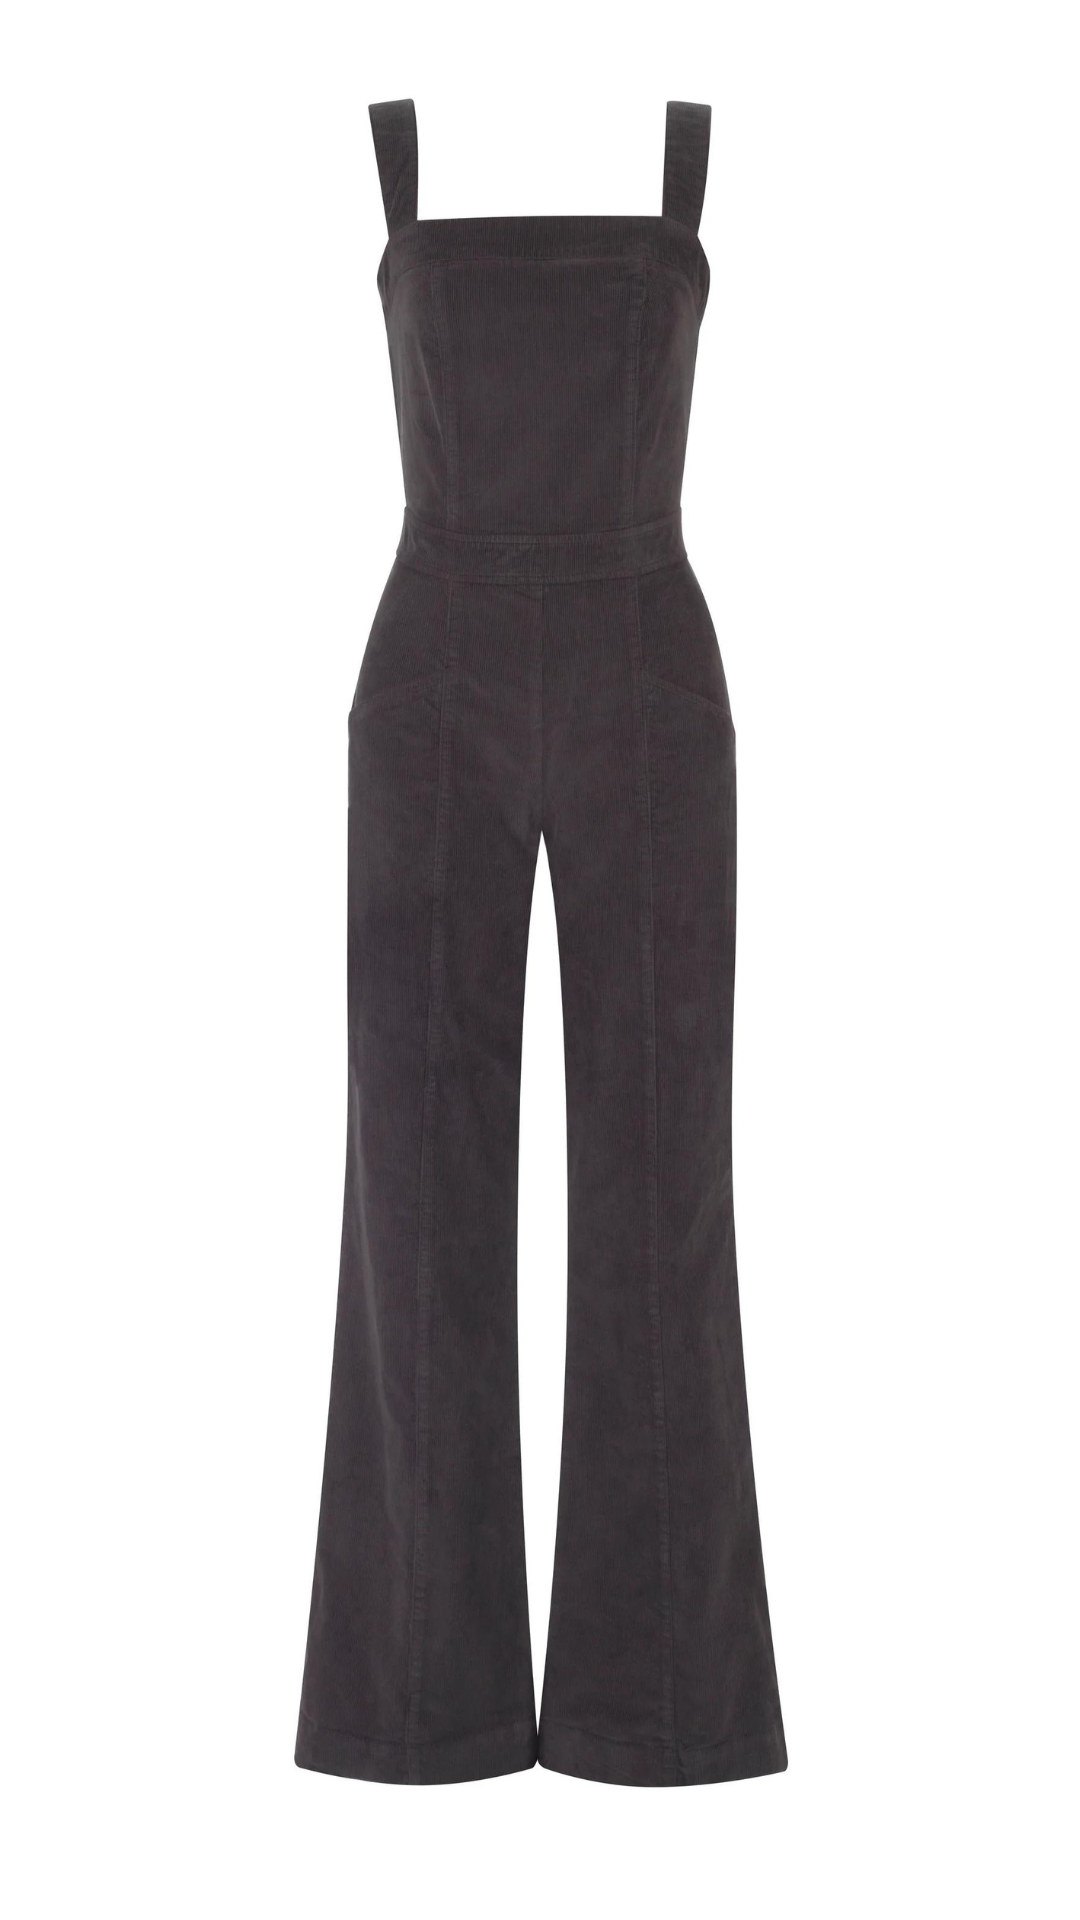 *NEW* SIENNA Dungarees in Cord - Rock the Jumpsuit